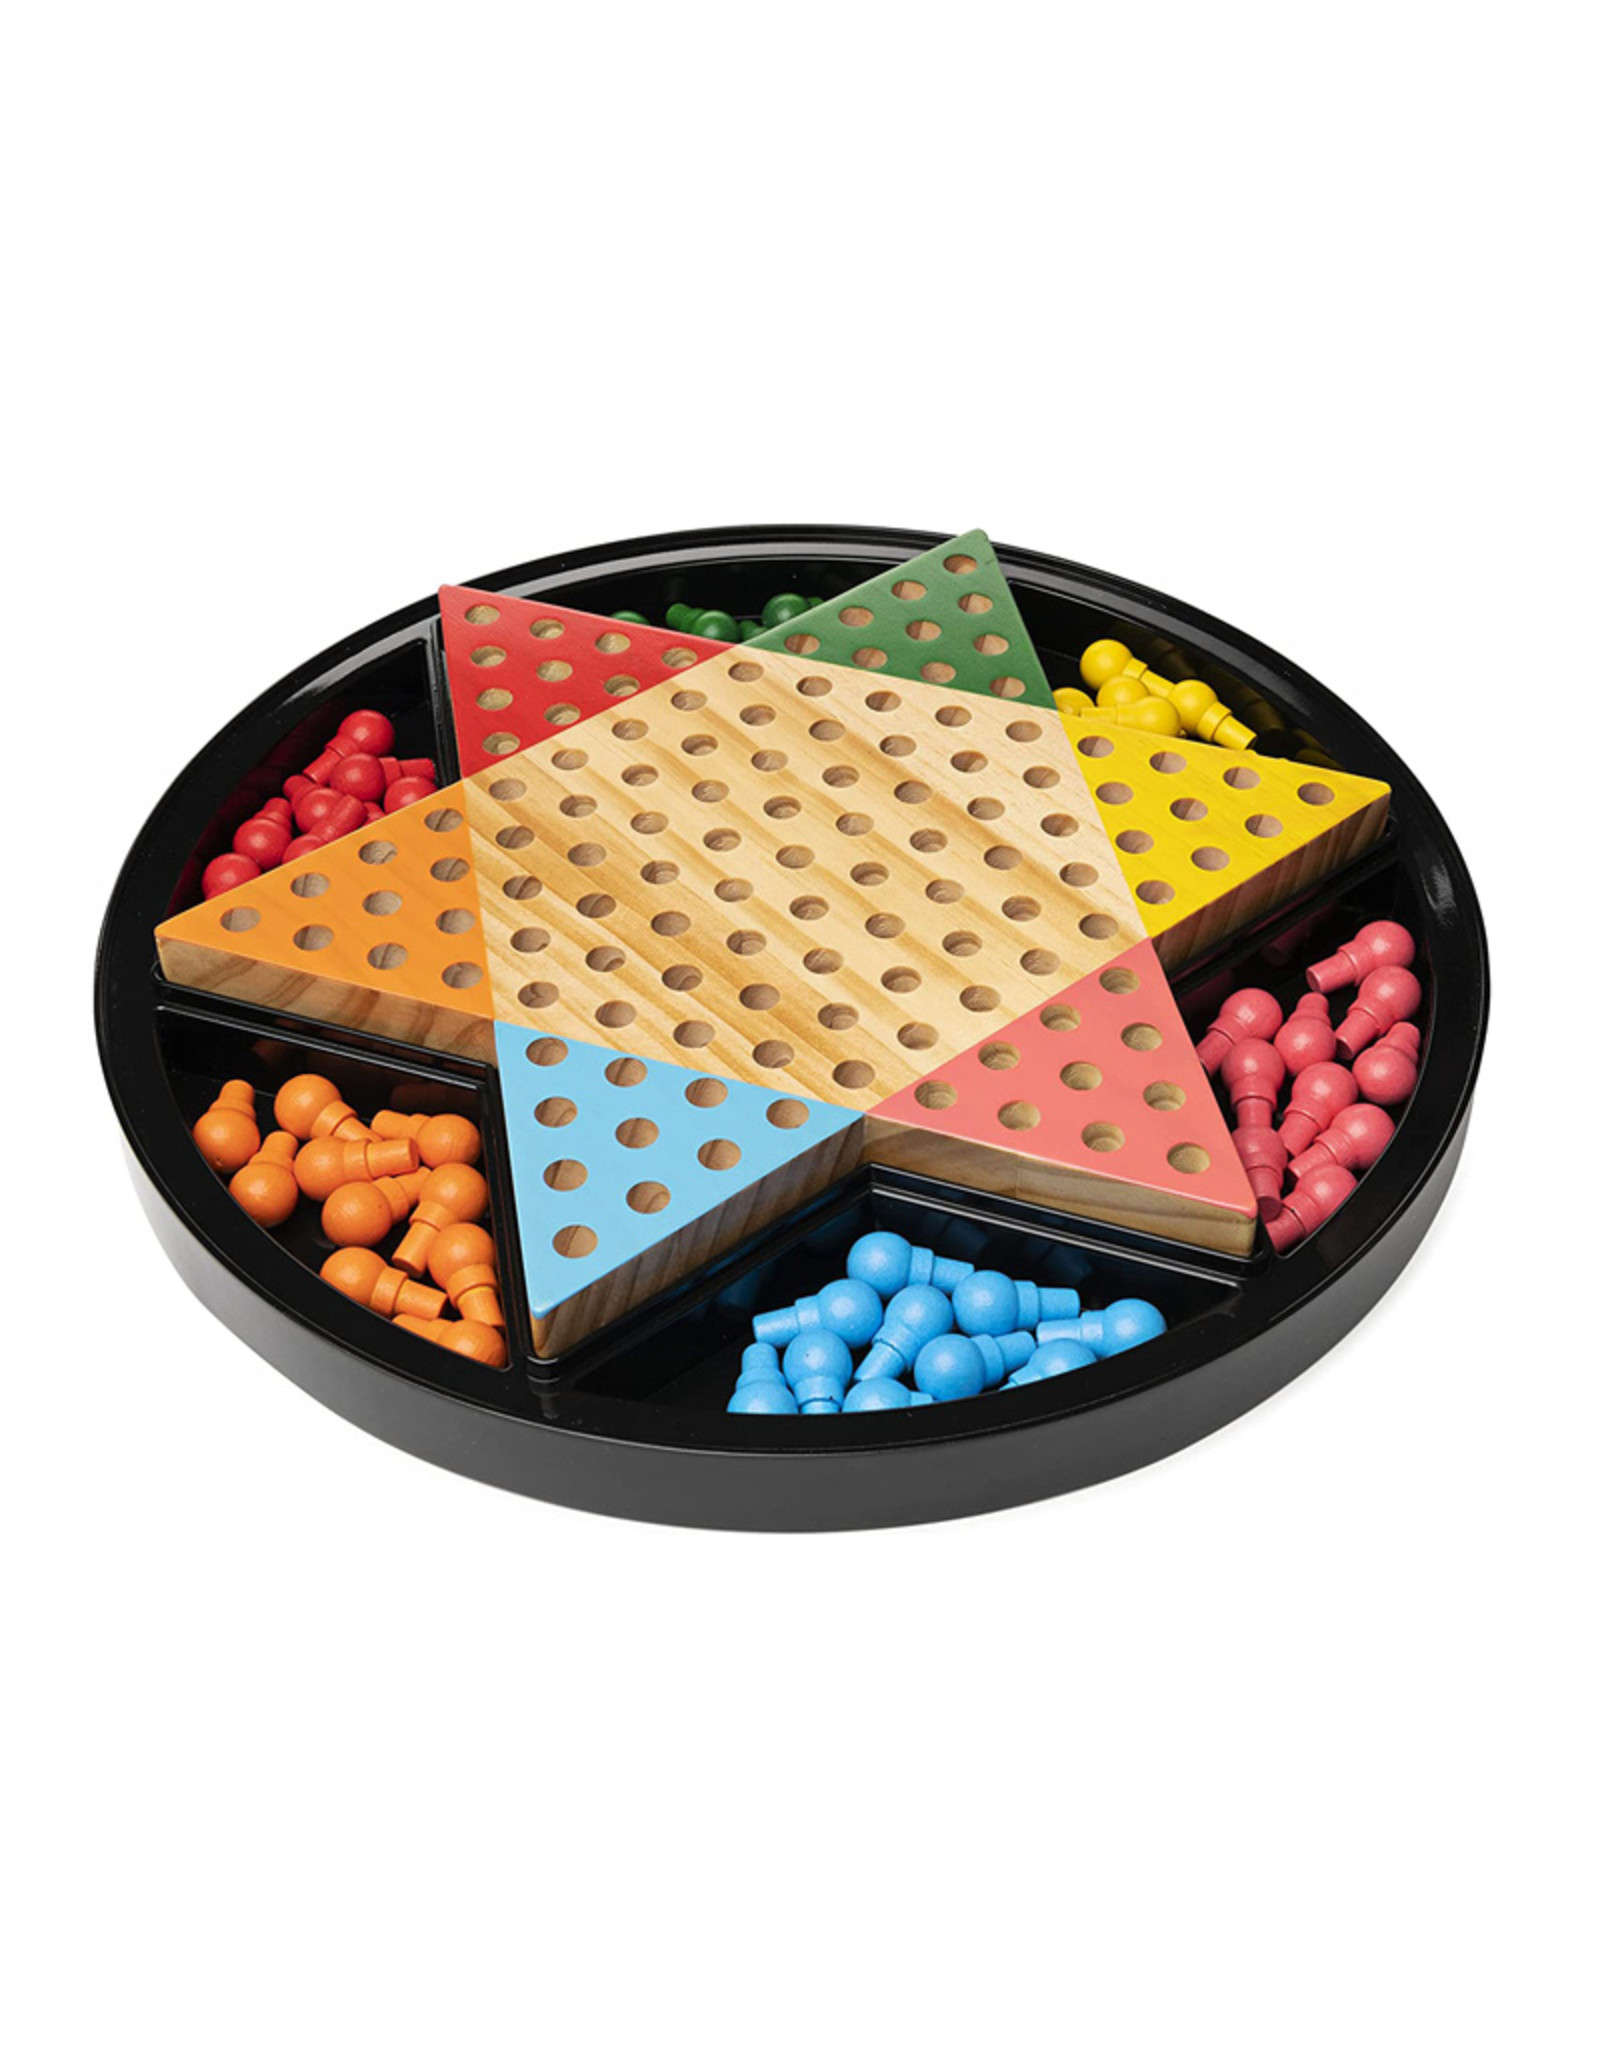 Spin Master Games Deluxe Chinese Checkers